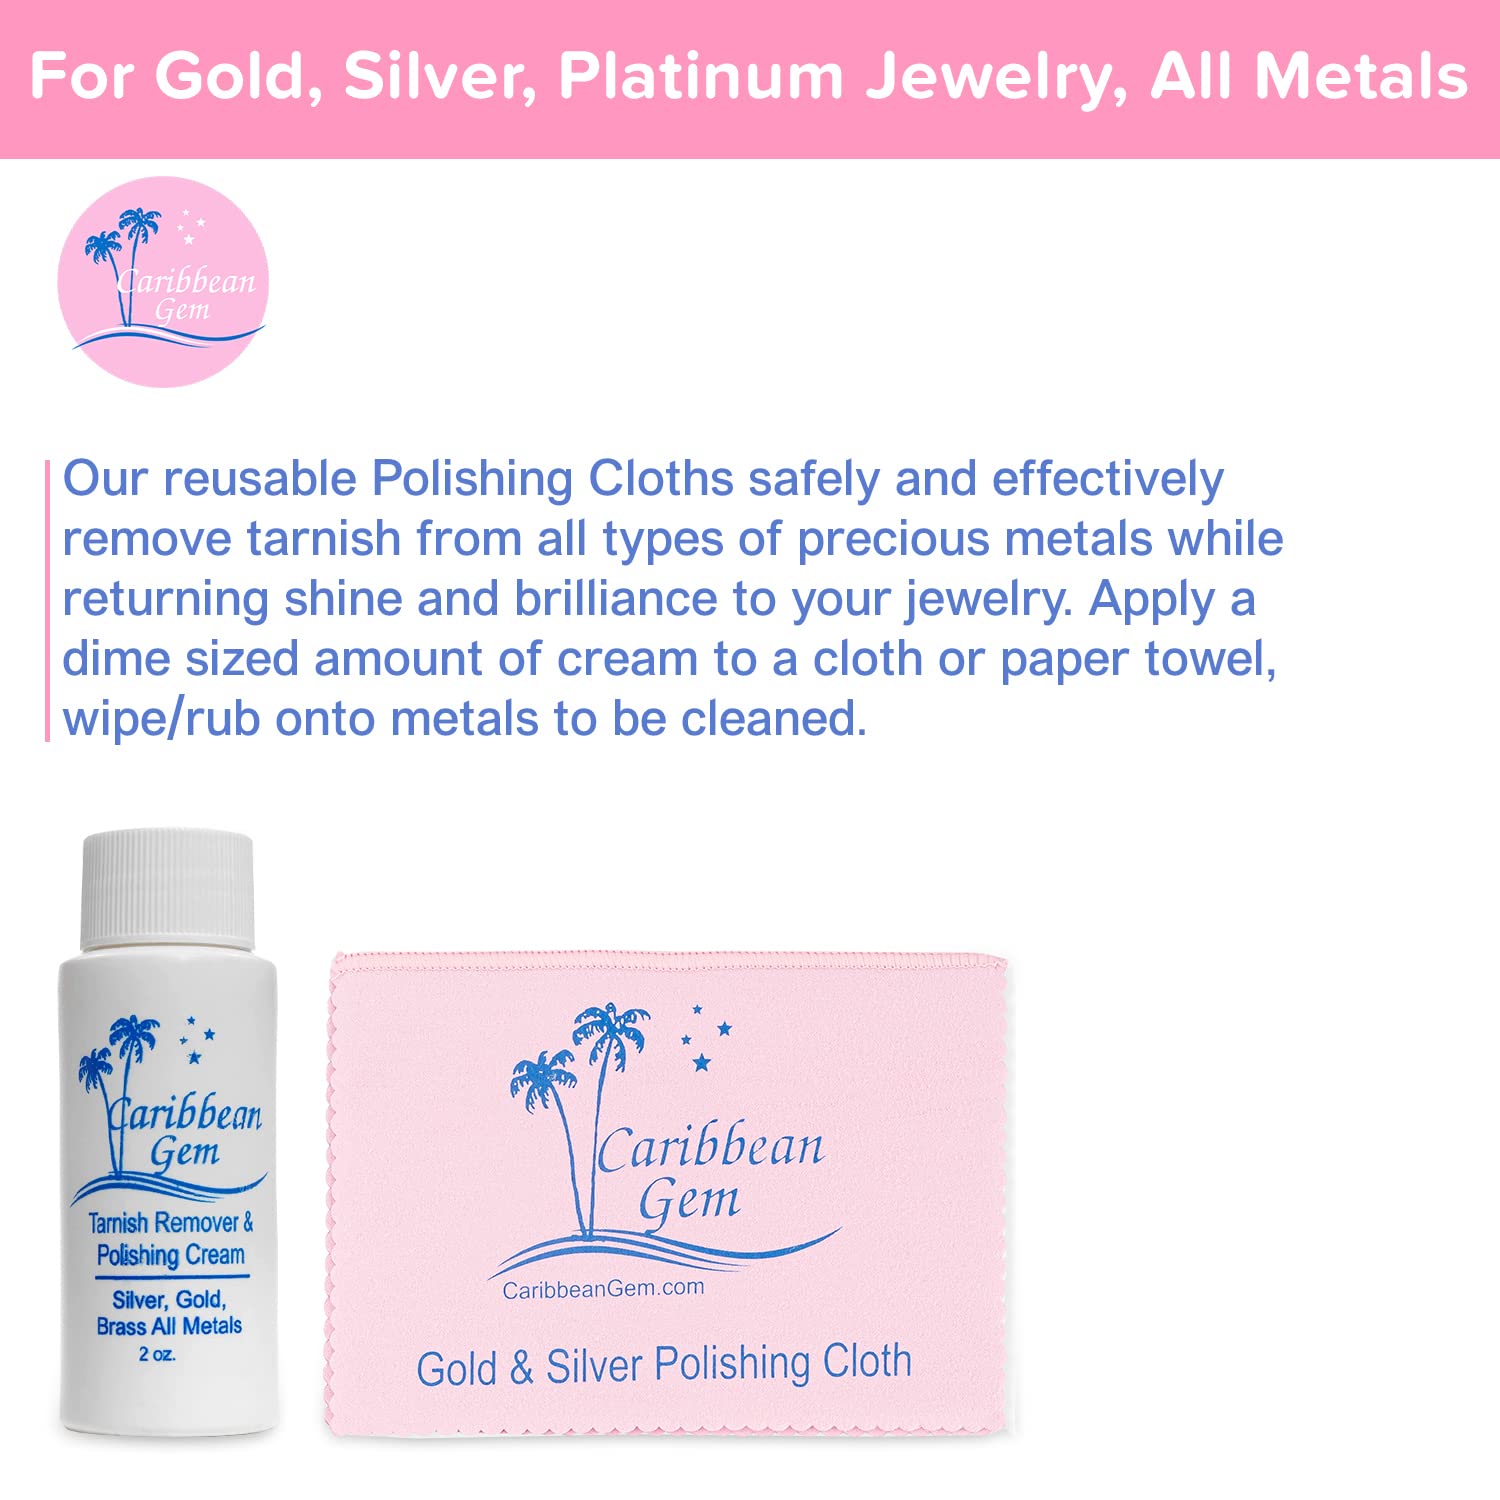  Caribbean Gem Premium Jewelry Cleaner - All Purposes Natural  Banana & Coconut Oil Jewelry Cleaning Solution - Ammonia Free &  Hypoallergenic Cleaner Solution For Gold, Silver, Rings and Precious Gems 